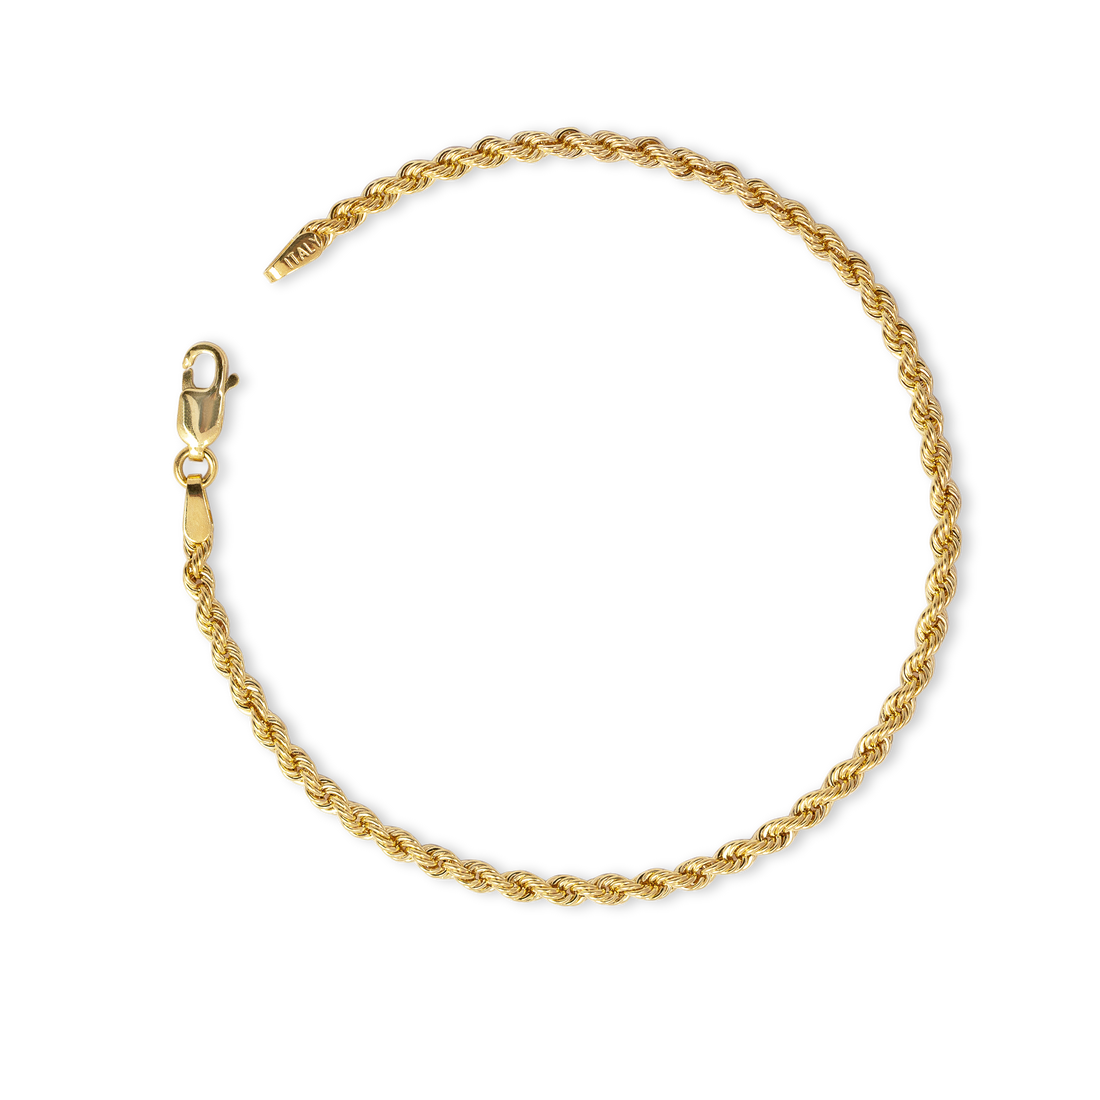 womens rope bracelets gold canada, 10k gold rope bracelet womens, womens gold bracelets canada, 10k gold bracelet canada, chunky gold bracelet womens